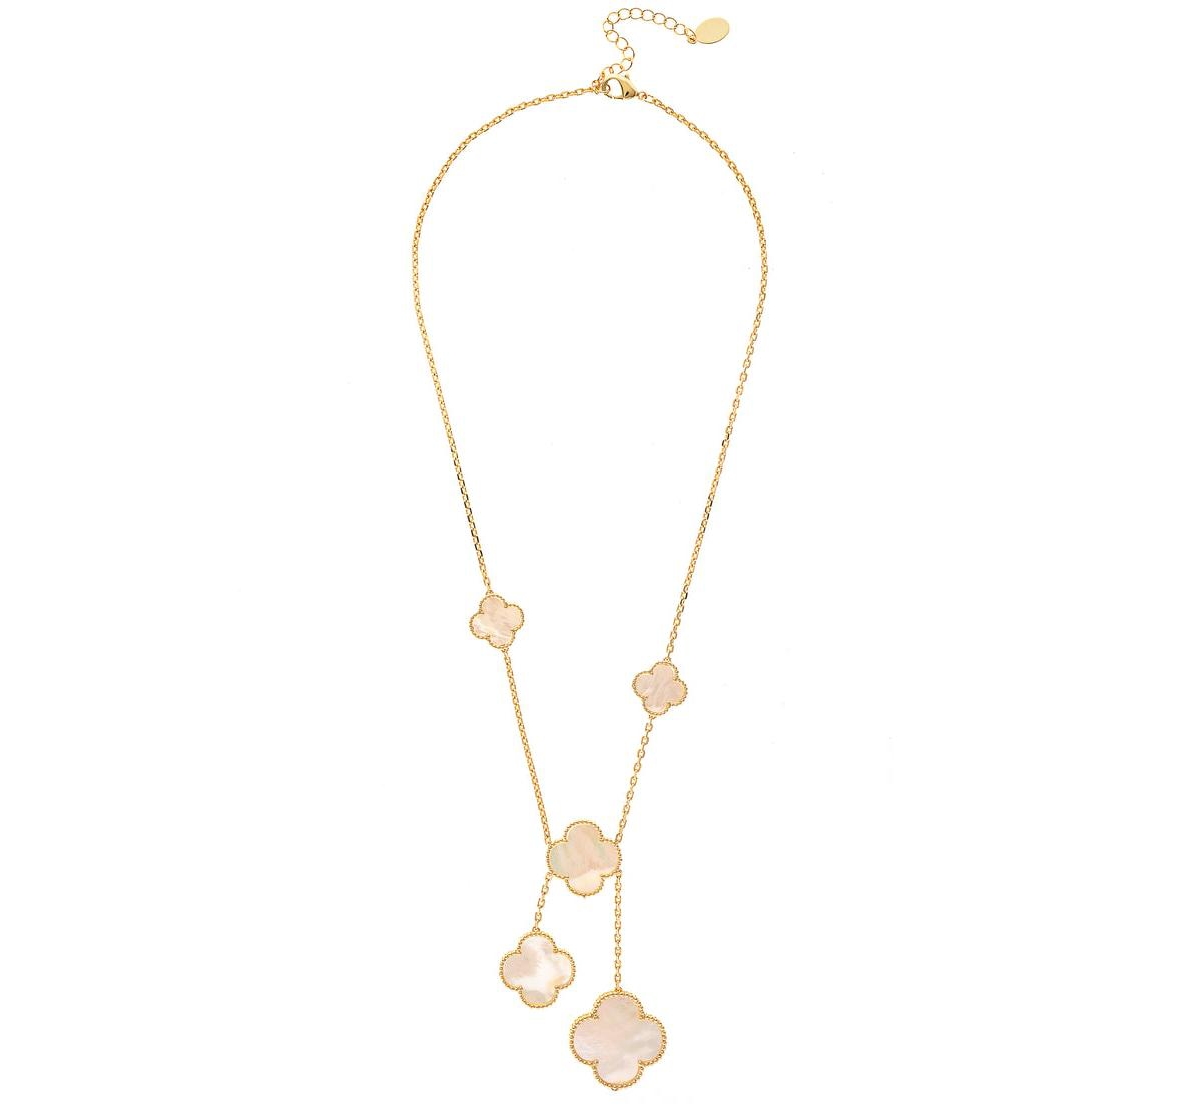 Mother of Pearl Clover Station Y Necklace - Gold with white mother of pearl